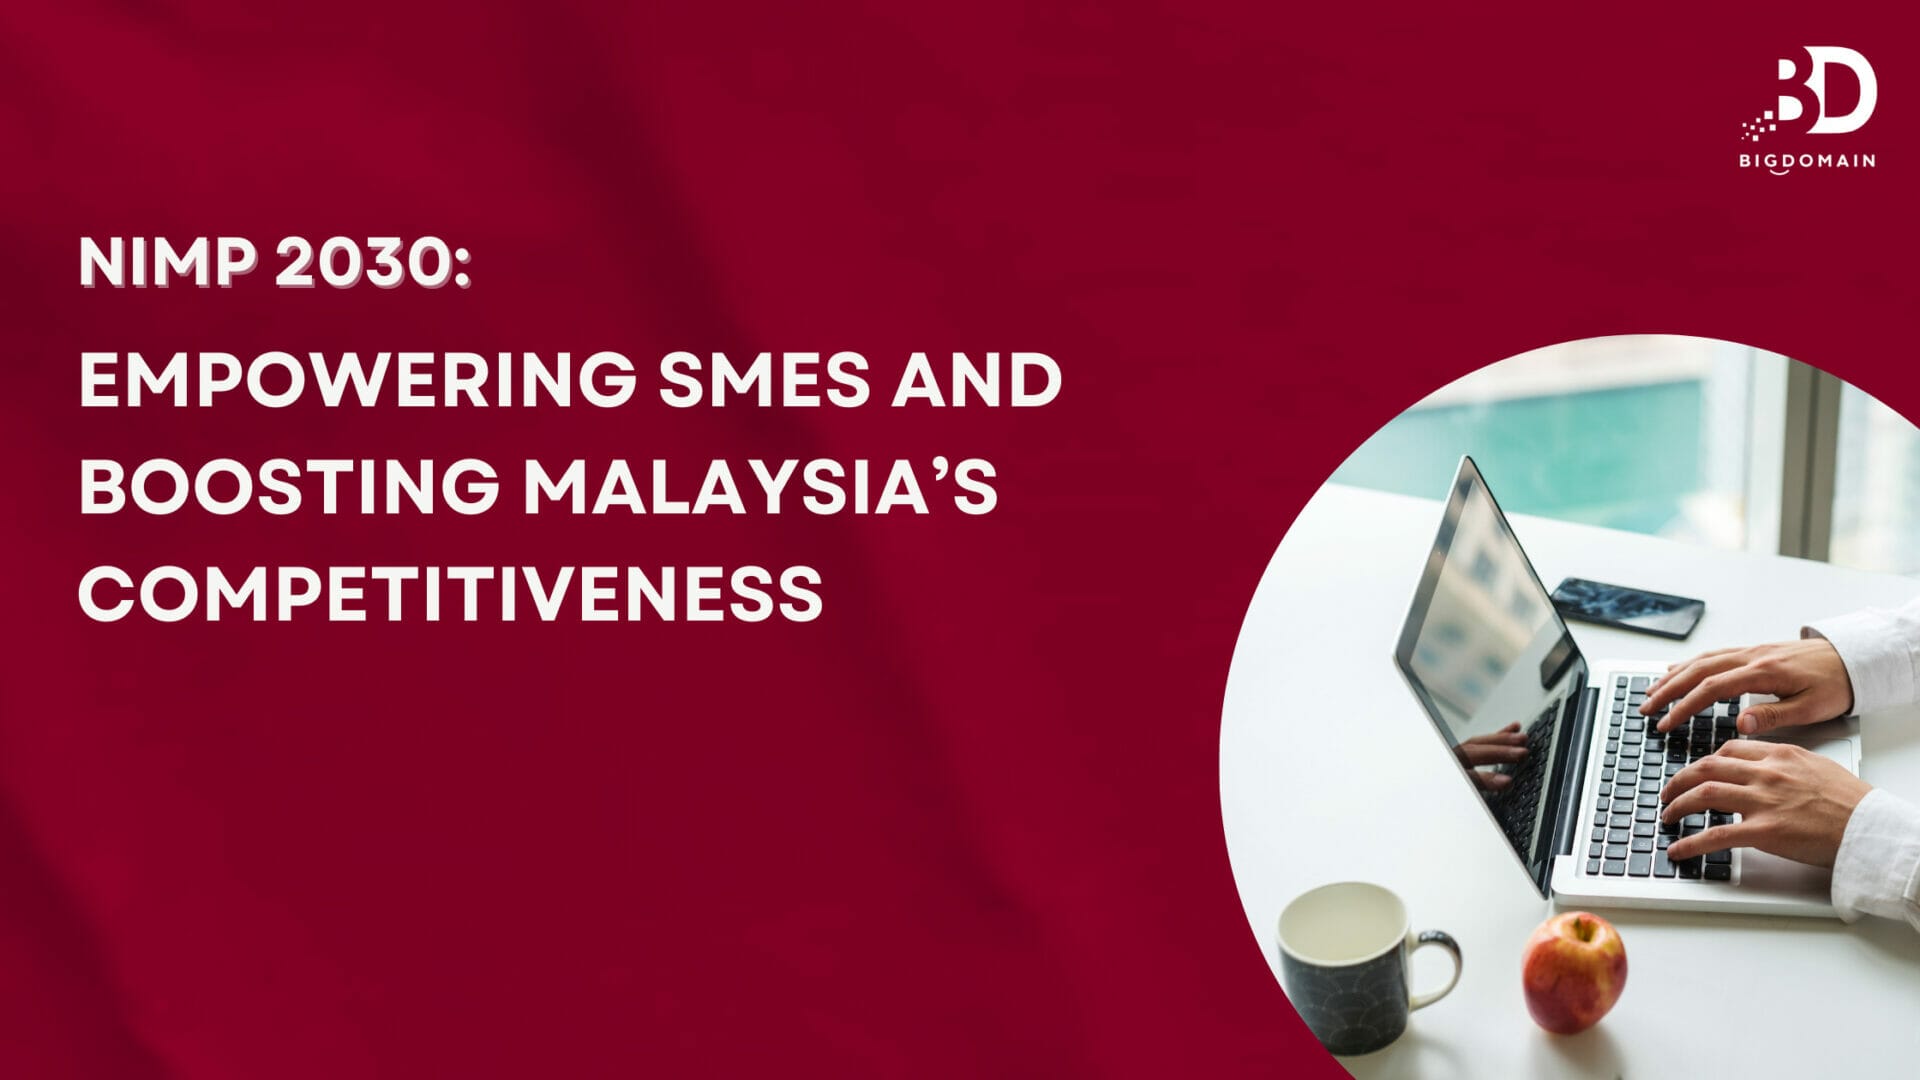 NIMP 2030: Empowering SMEs and Boosting Malaysia's Competitiveness